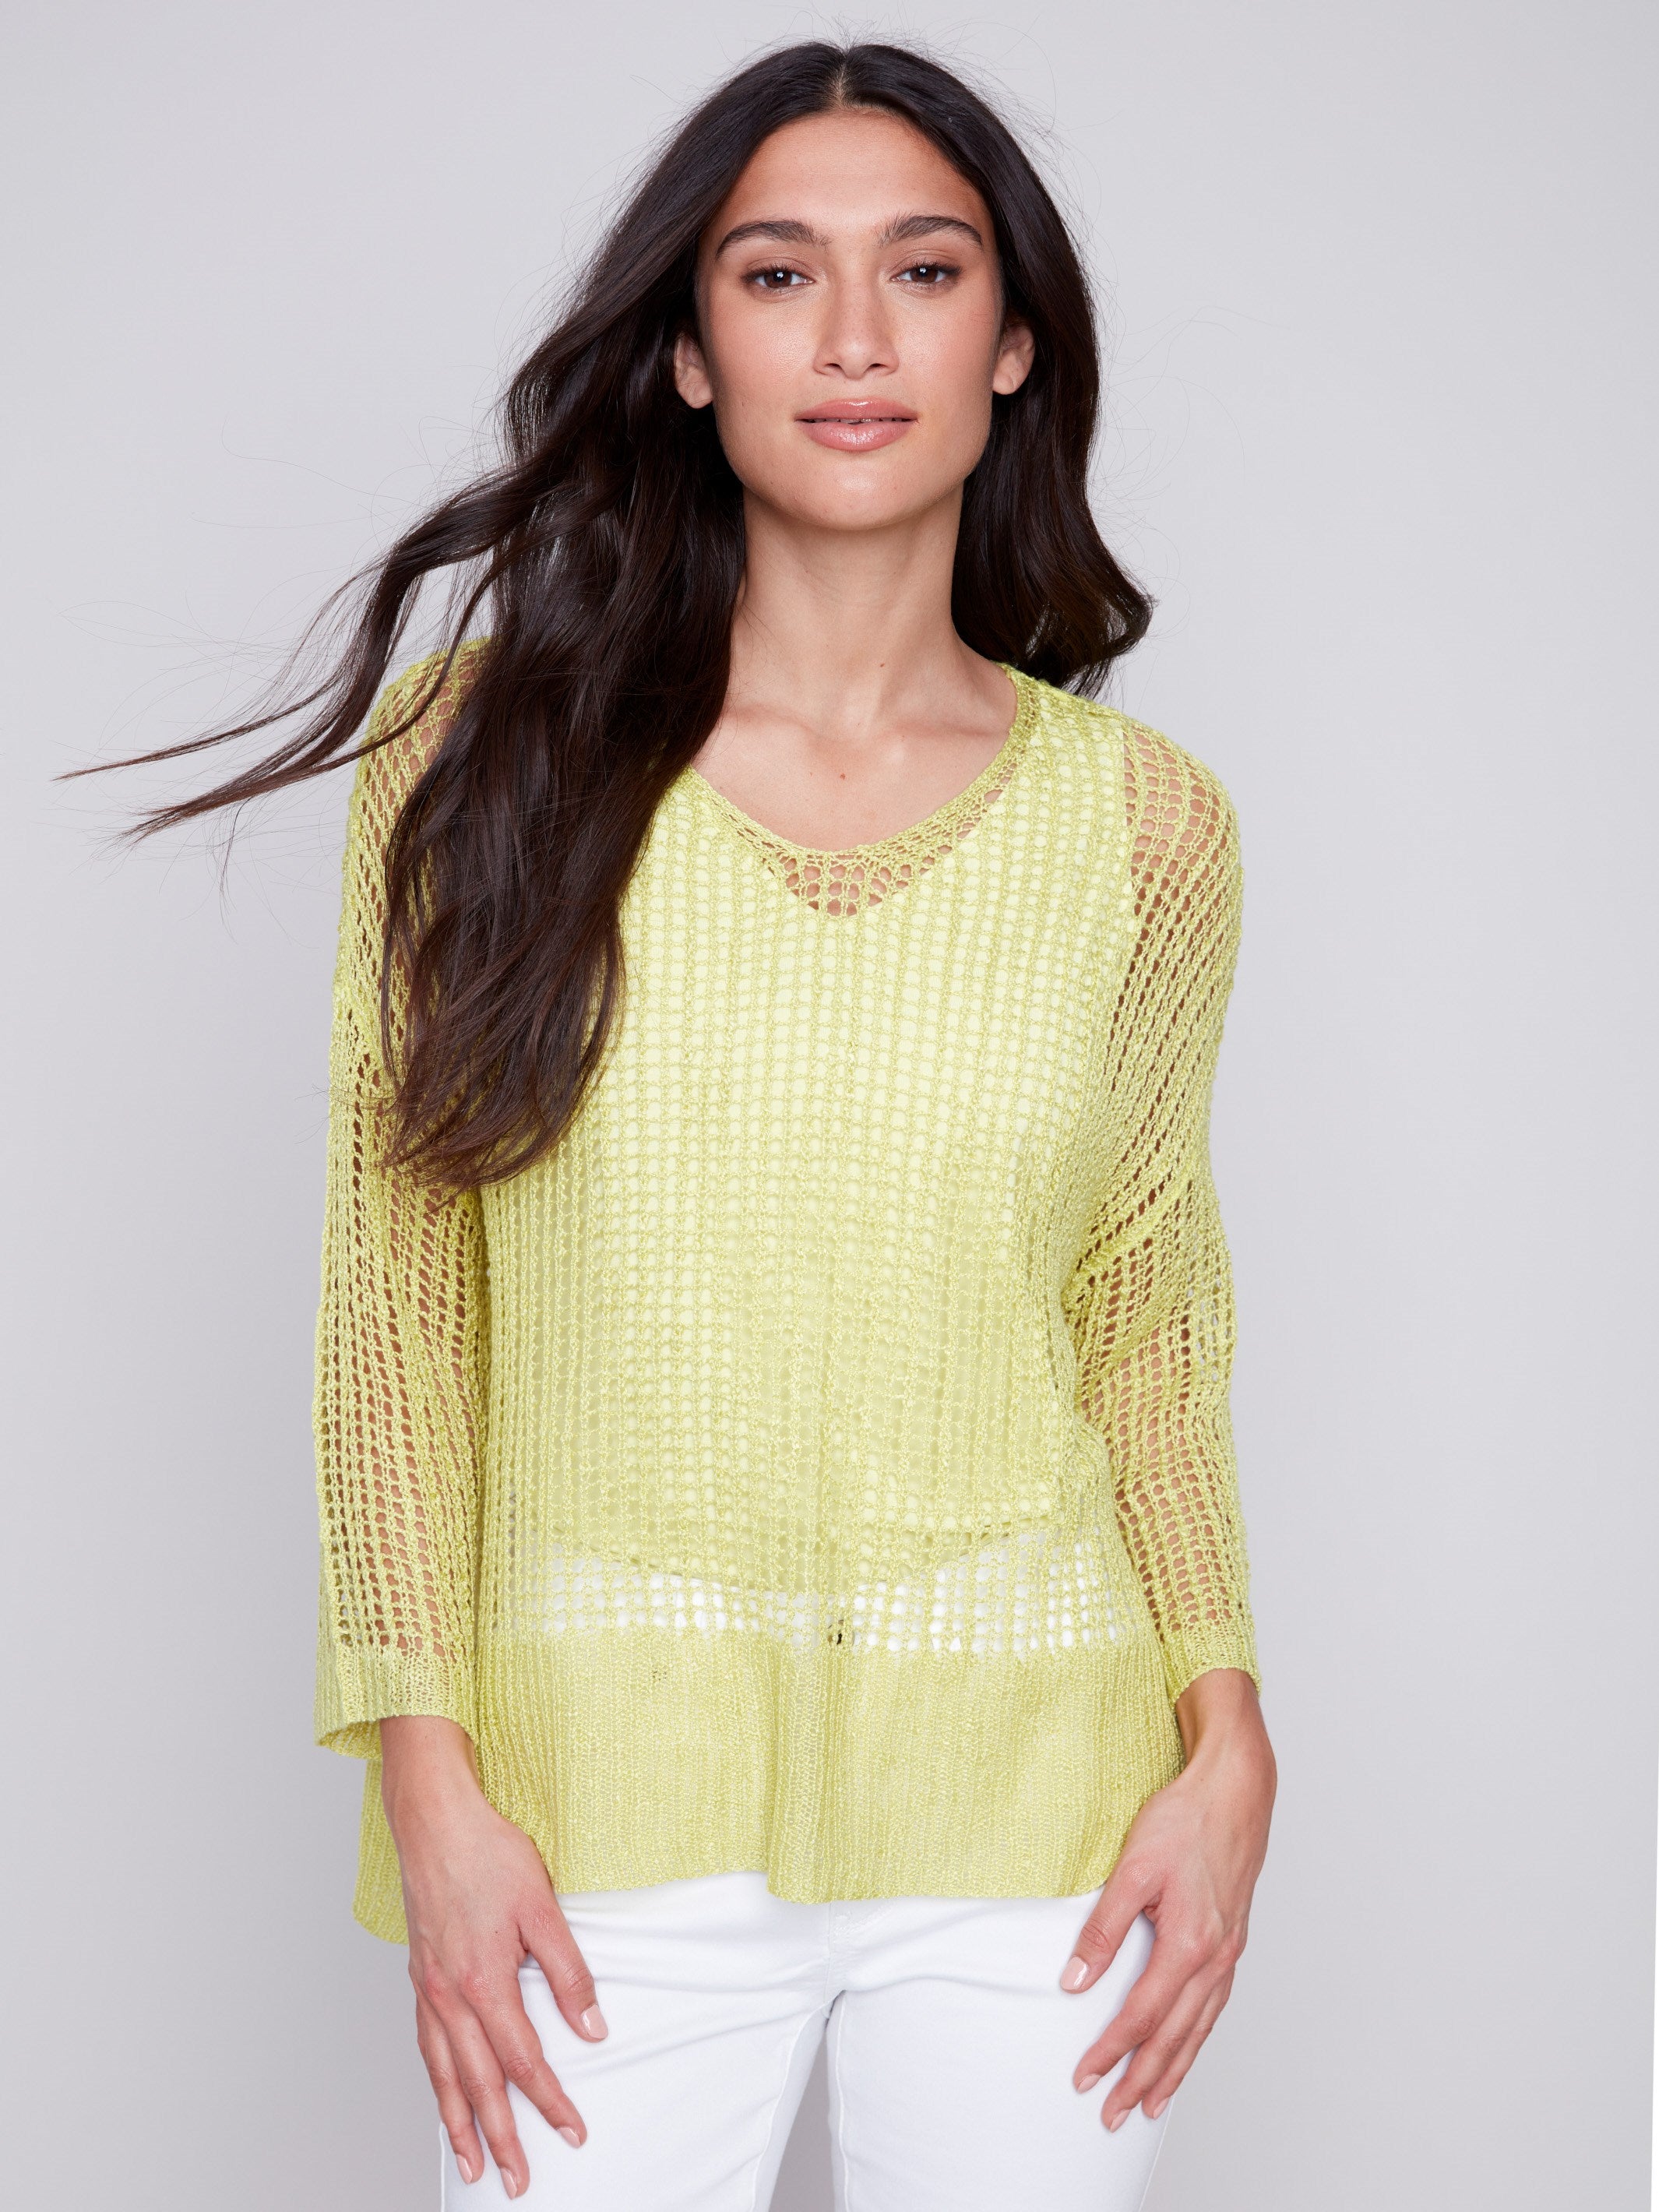 Fishnet Crochet Sweater - Anise - Charlie B Collection Canada - Image 1